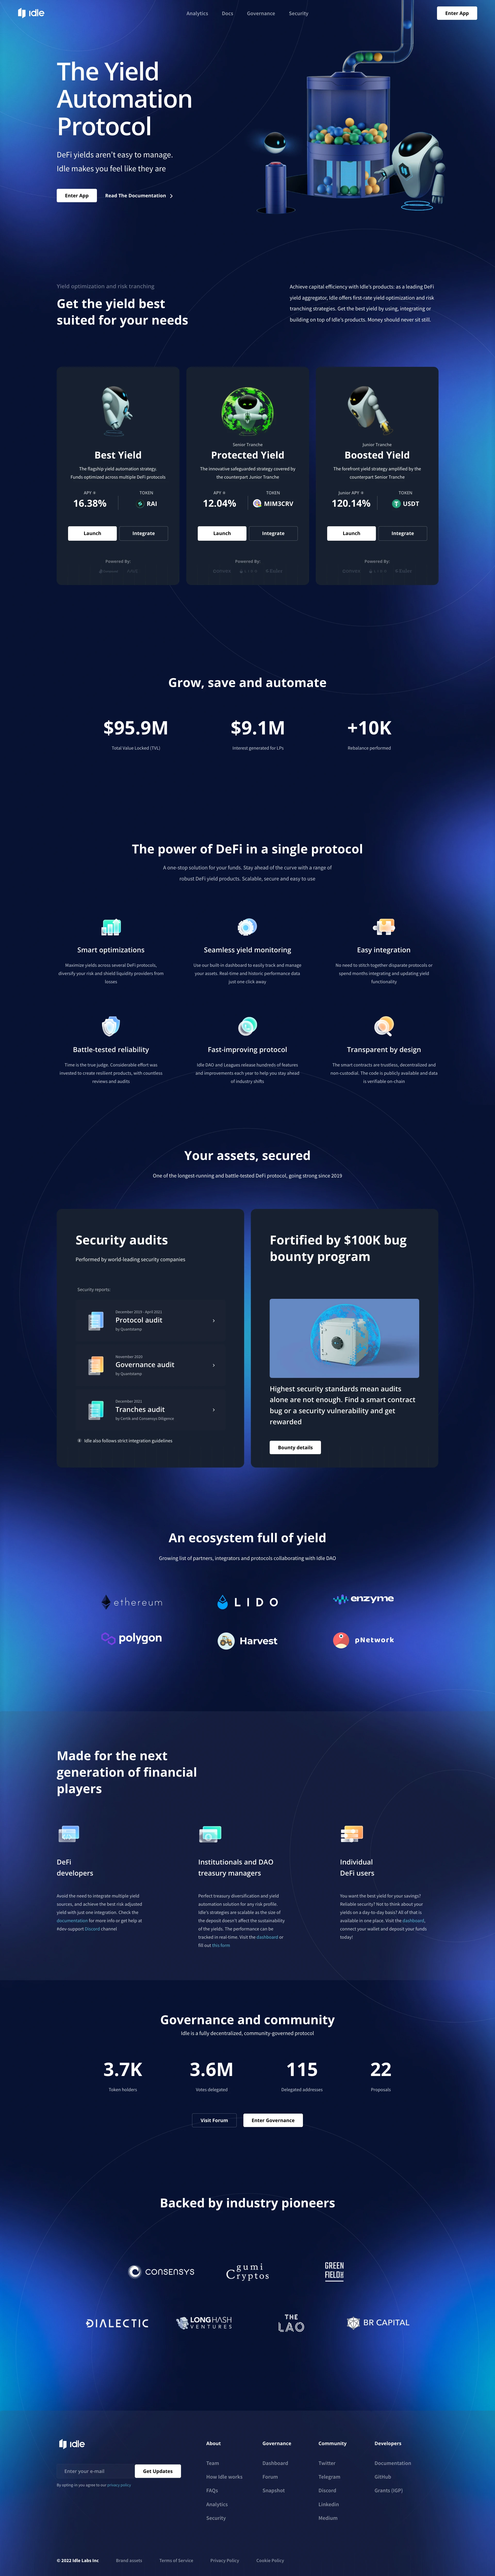 Idle Finance Landing Page Example: Idle offers first-rate yield optimization and risk tranching strategies. Get the best yield by using, integrating or building on top of Idle’s products.